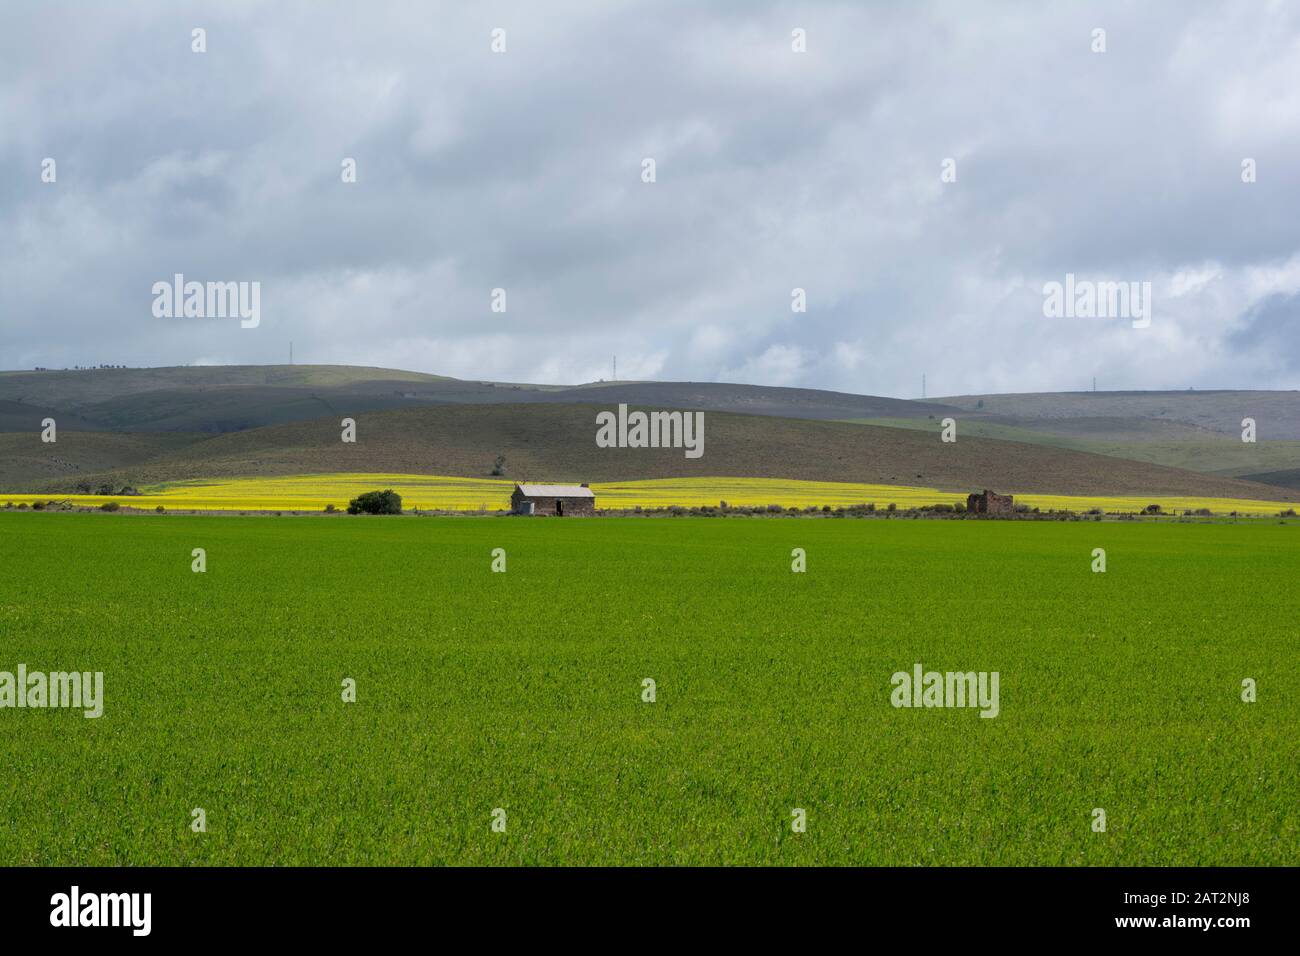 Random farm land in South Australia. A see of green fields backed by old brick buildings, rolling hills and a bright yellow strip of canola field. Stock Photo